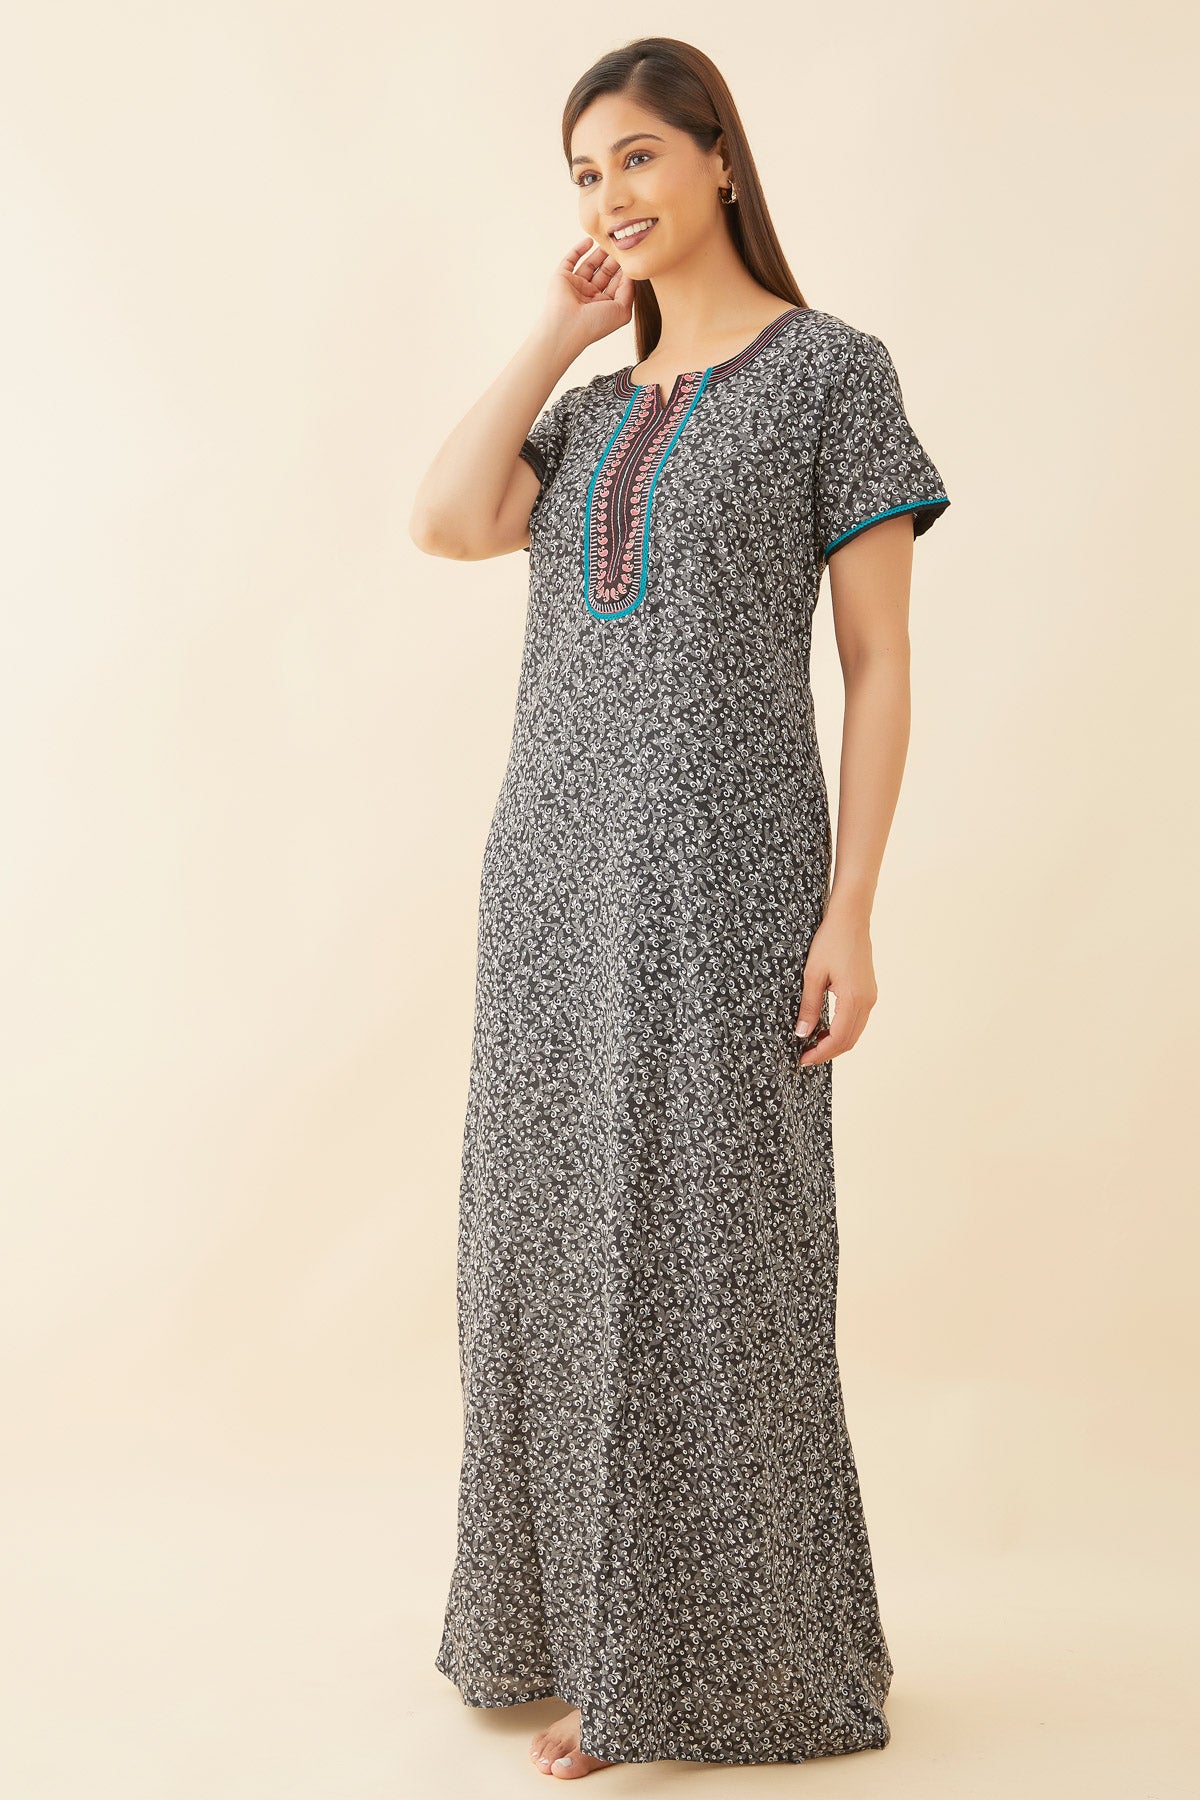 All Over Floral Printed With Contrast Paisley Embroidered Yoke Nighty - Black